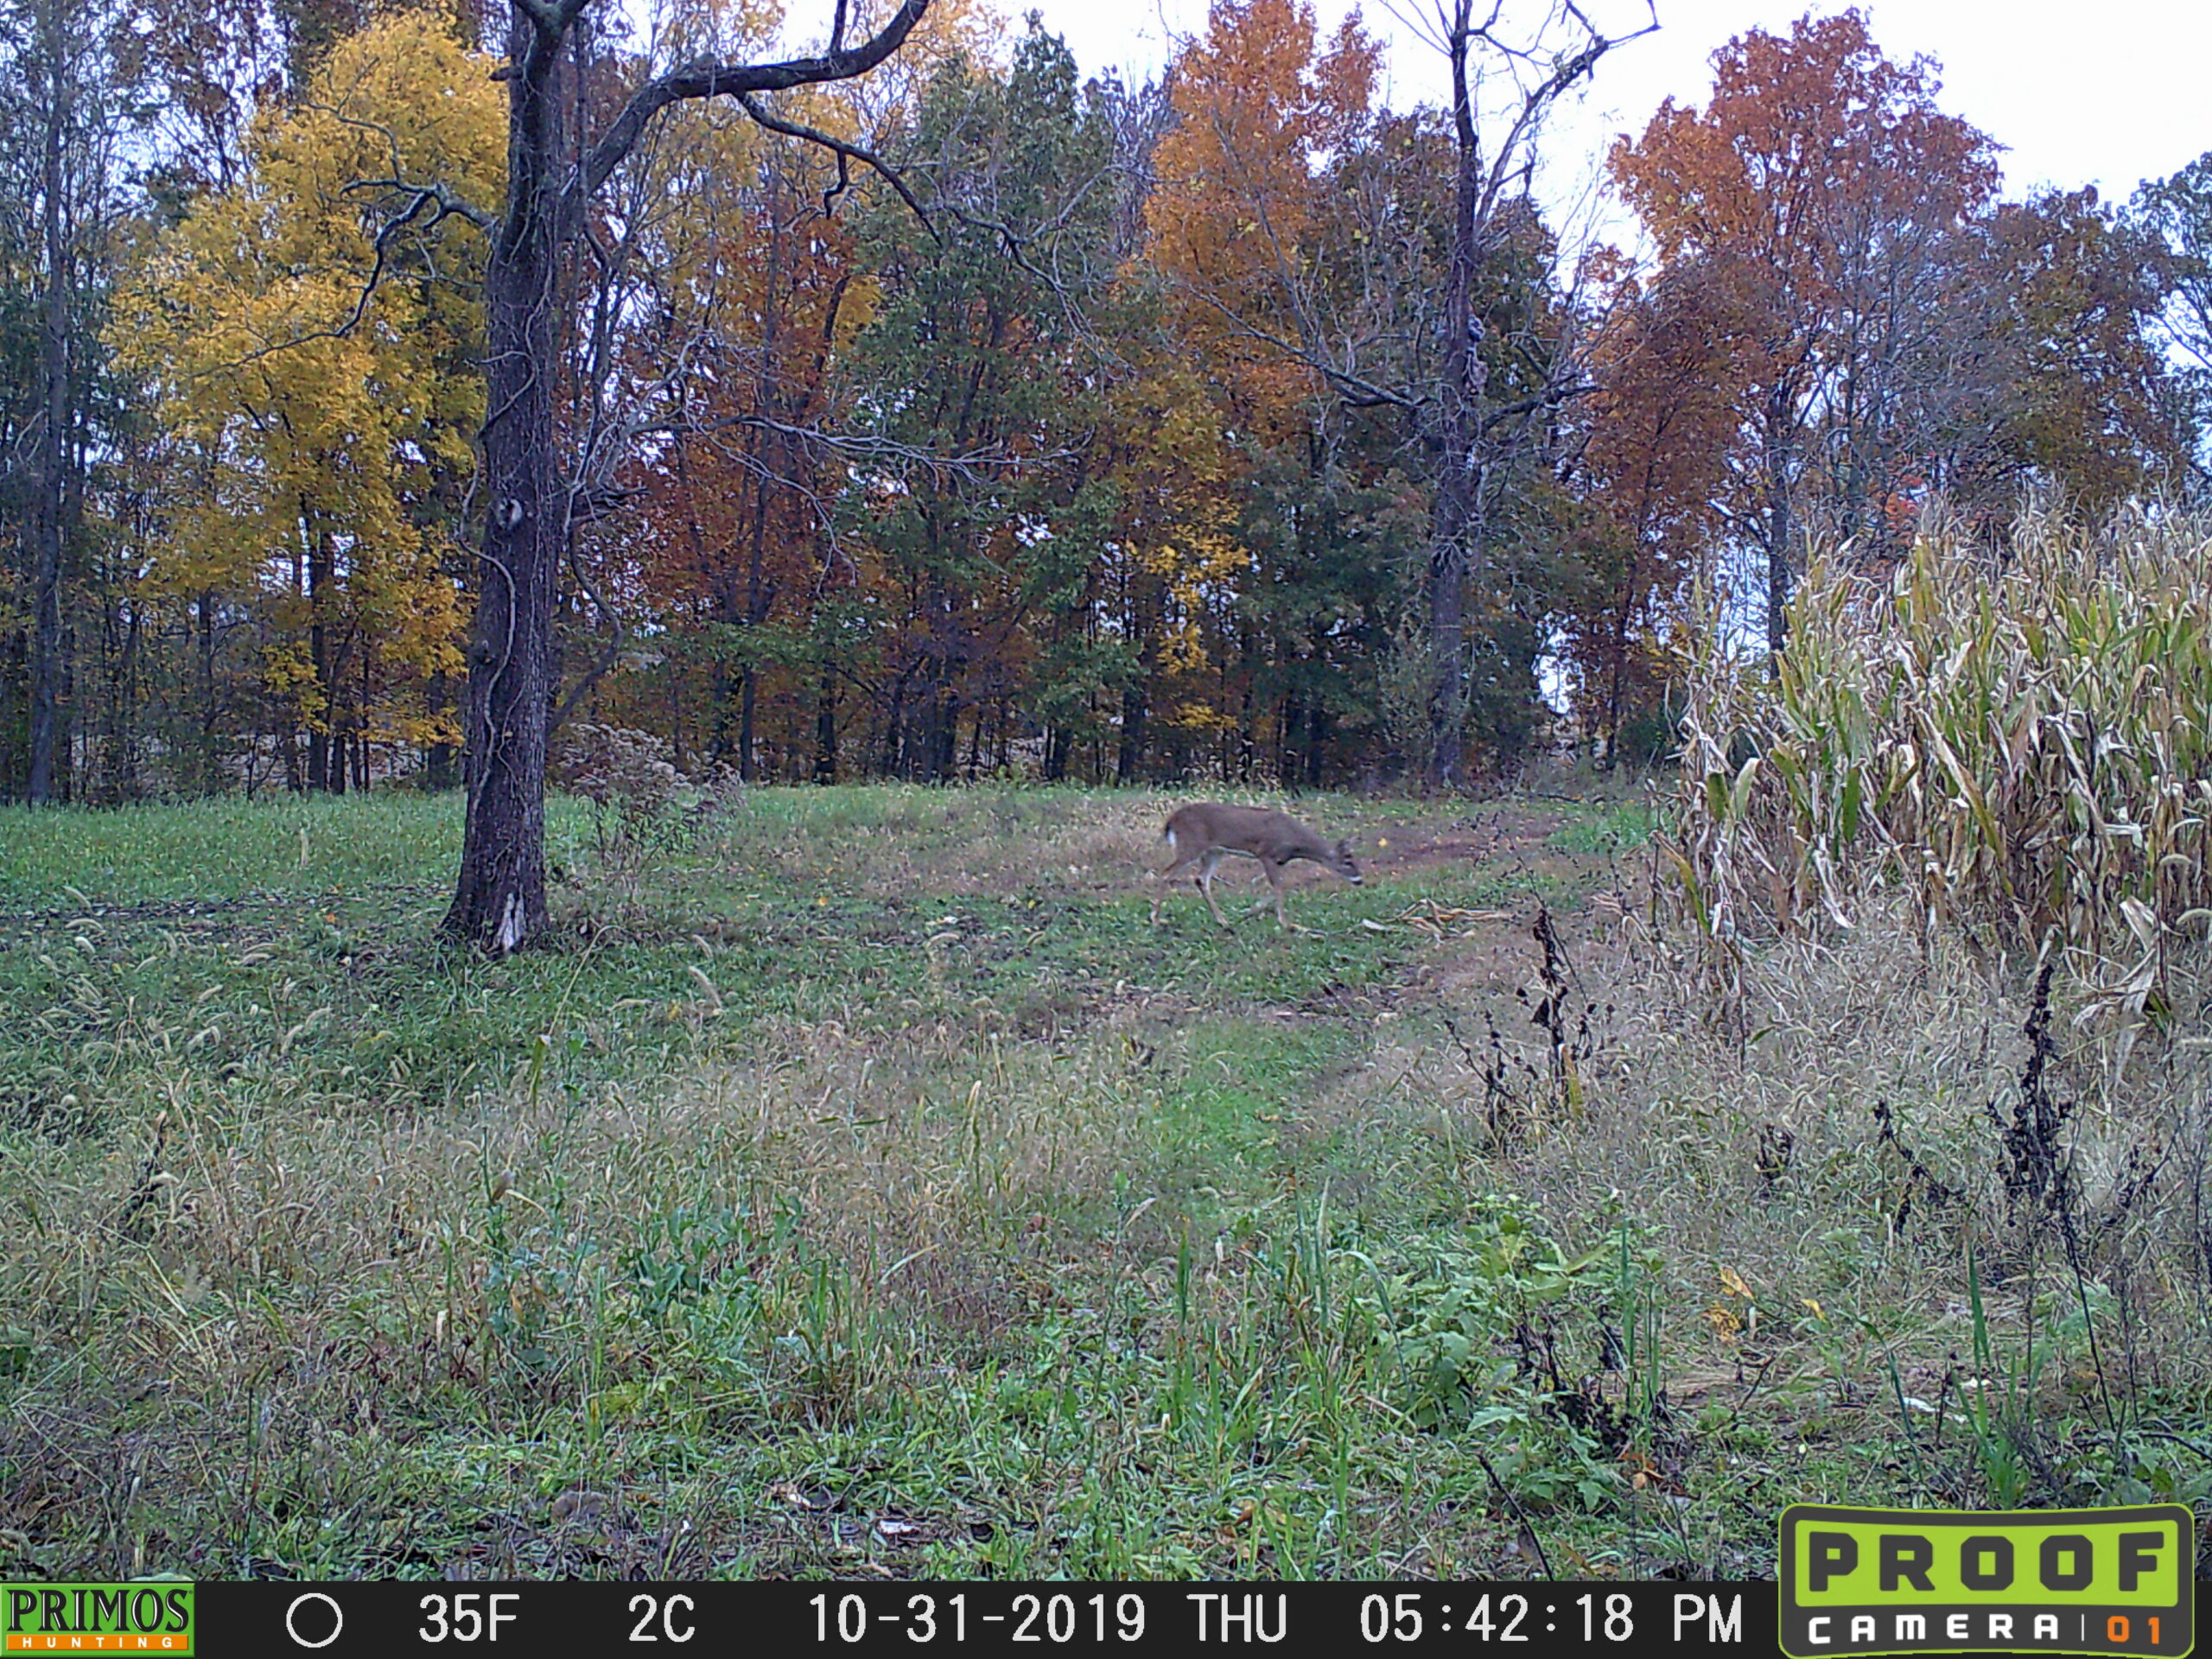 A small whitetail deer on a trail camera with changing leaves in the background.